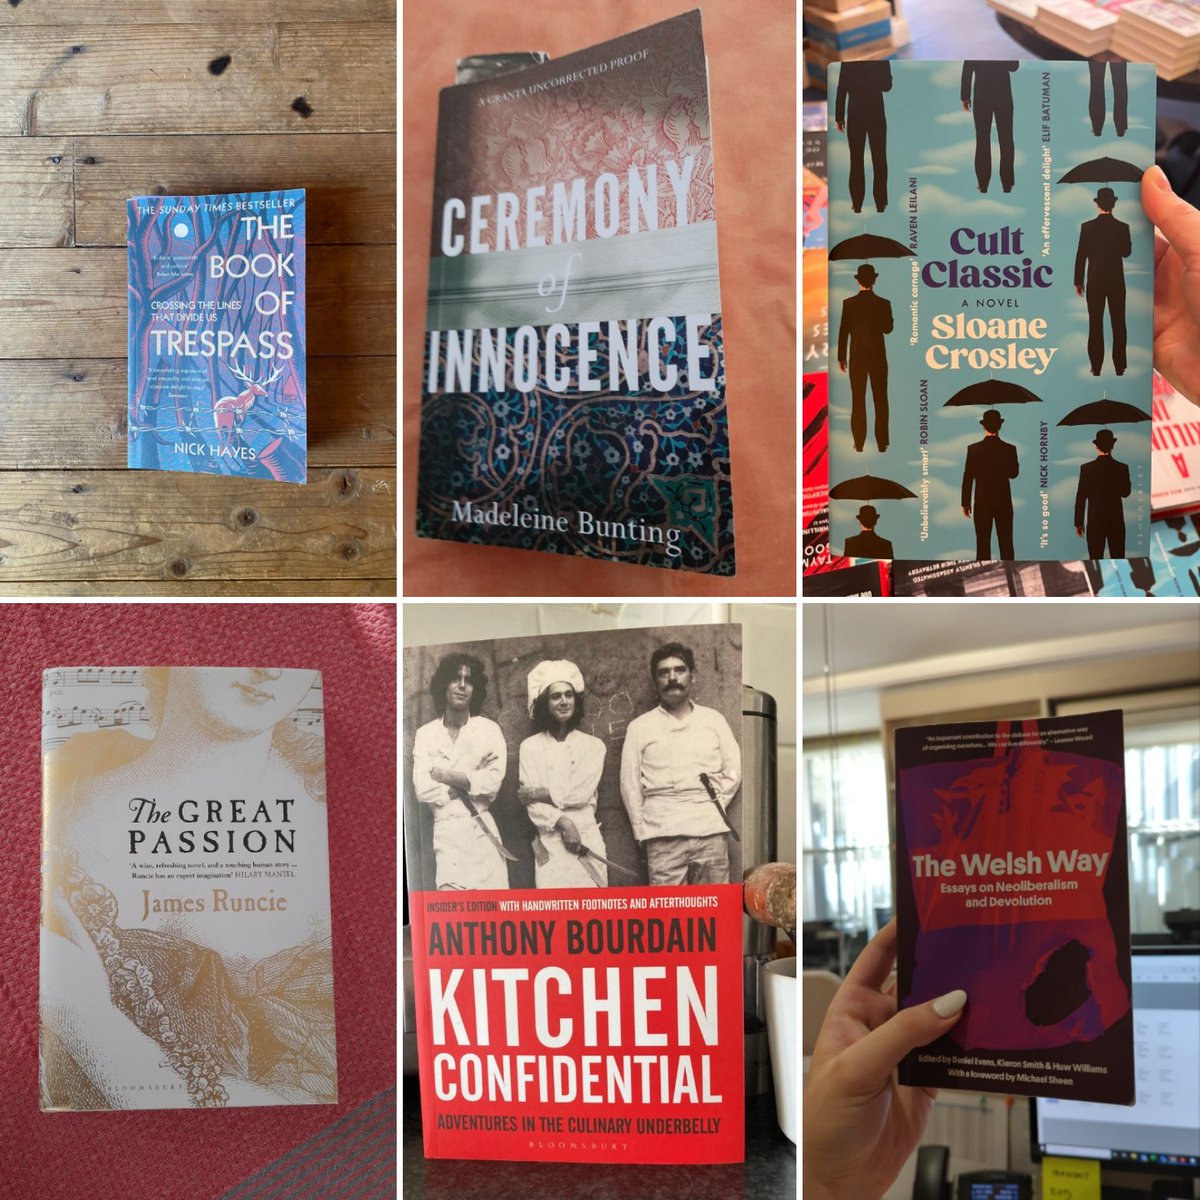 The summer and the drought churn on... Time for more summer reading! ☀️📚 James: The Book of Trespass, Karin: Ceremony of Innocence, Katie: Cult Classic, Eleanor: The Great Passion, Nicole: Kitchen Confidential, Conal: The Welsh Way. How about you? #wwrw #currentlyreading